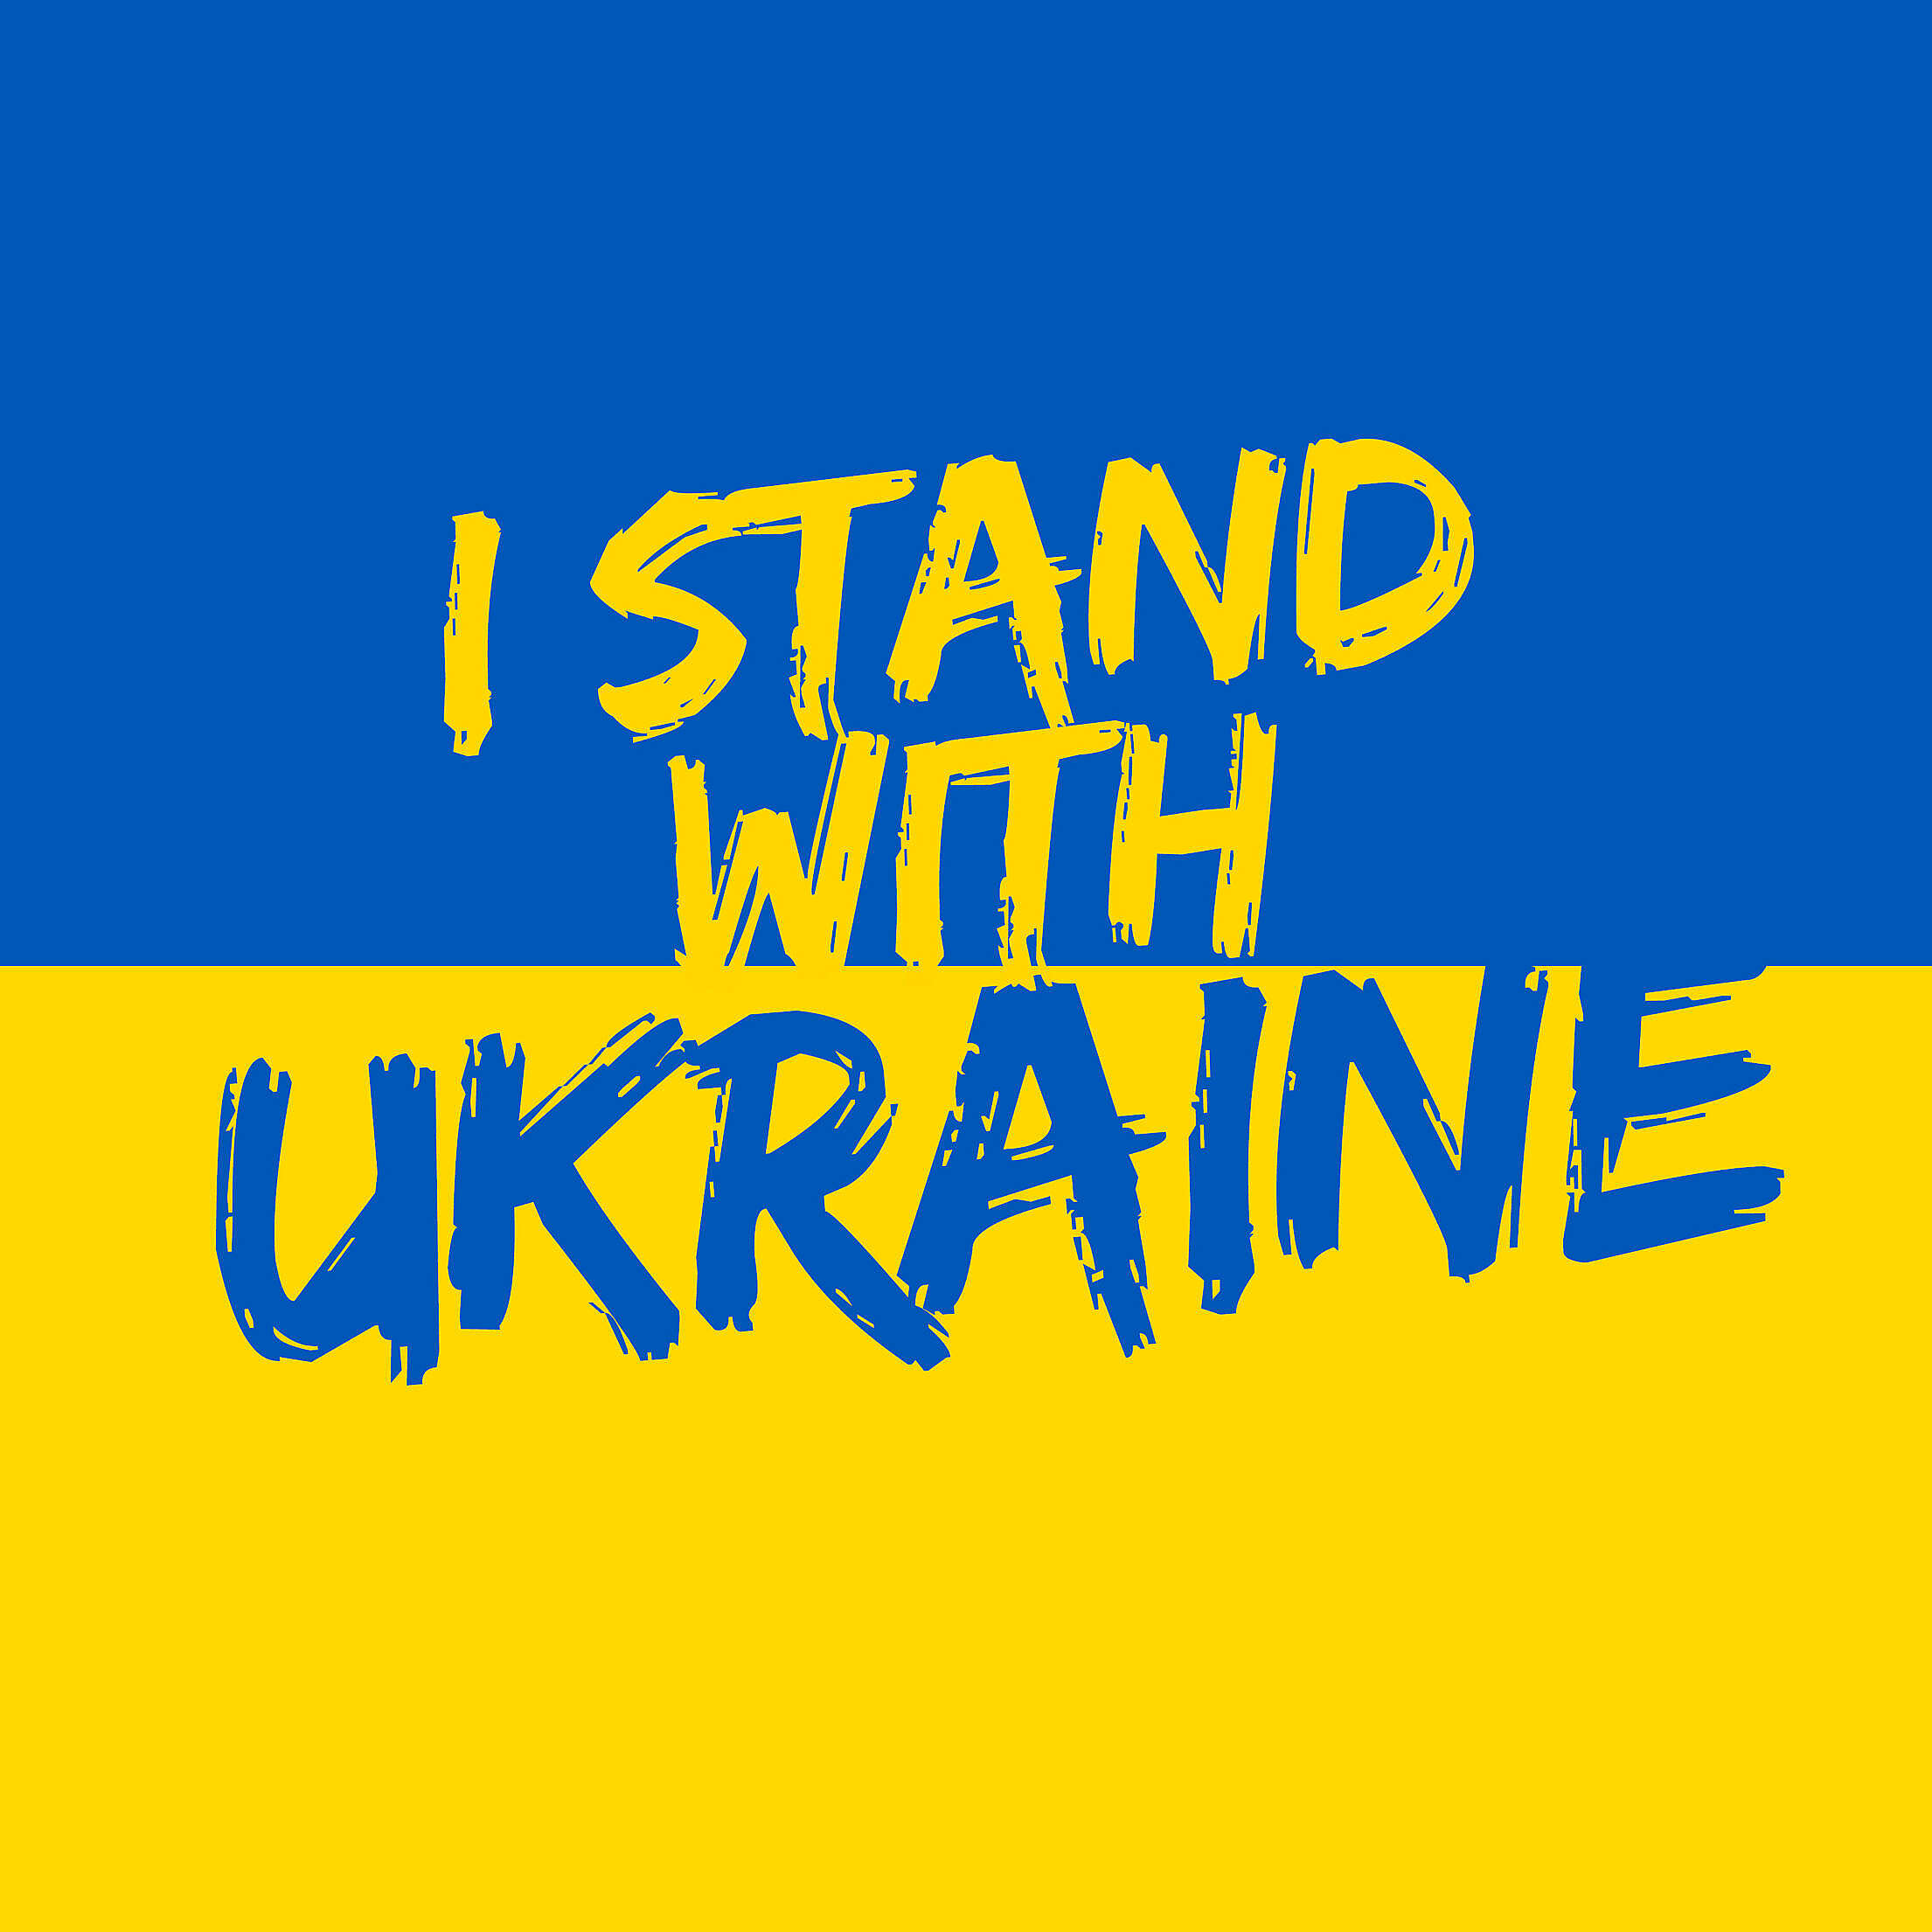 I Stand With Ukraine Profile Picture Free Stock Photo